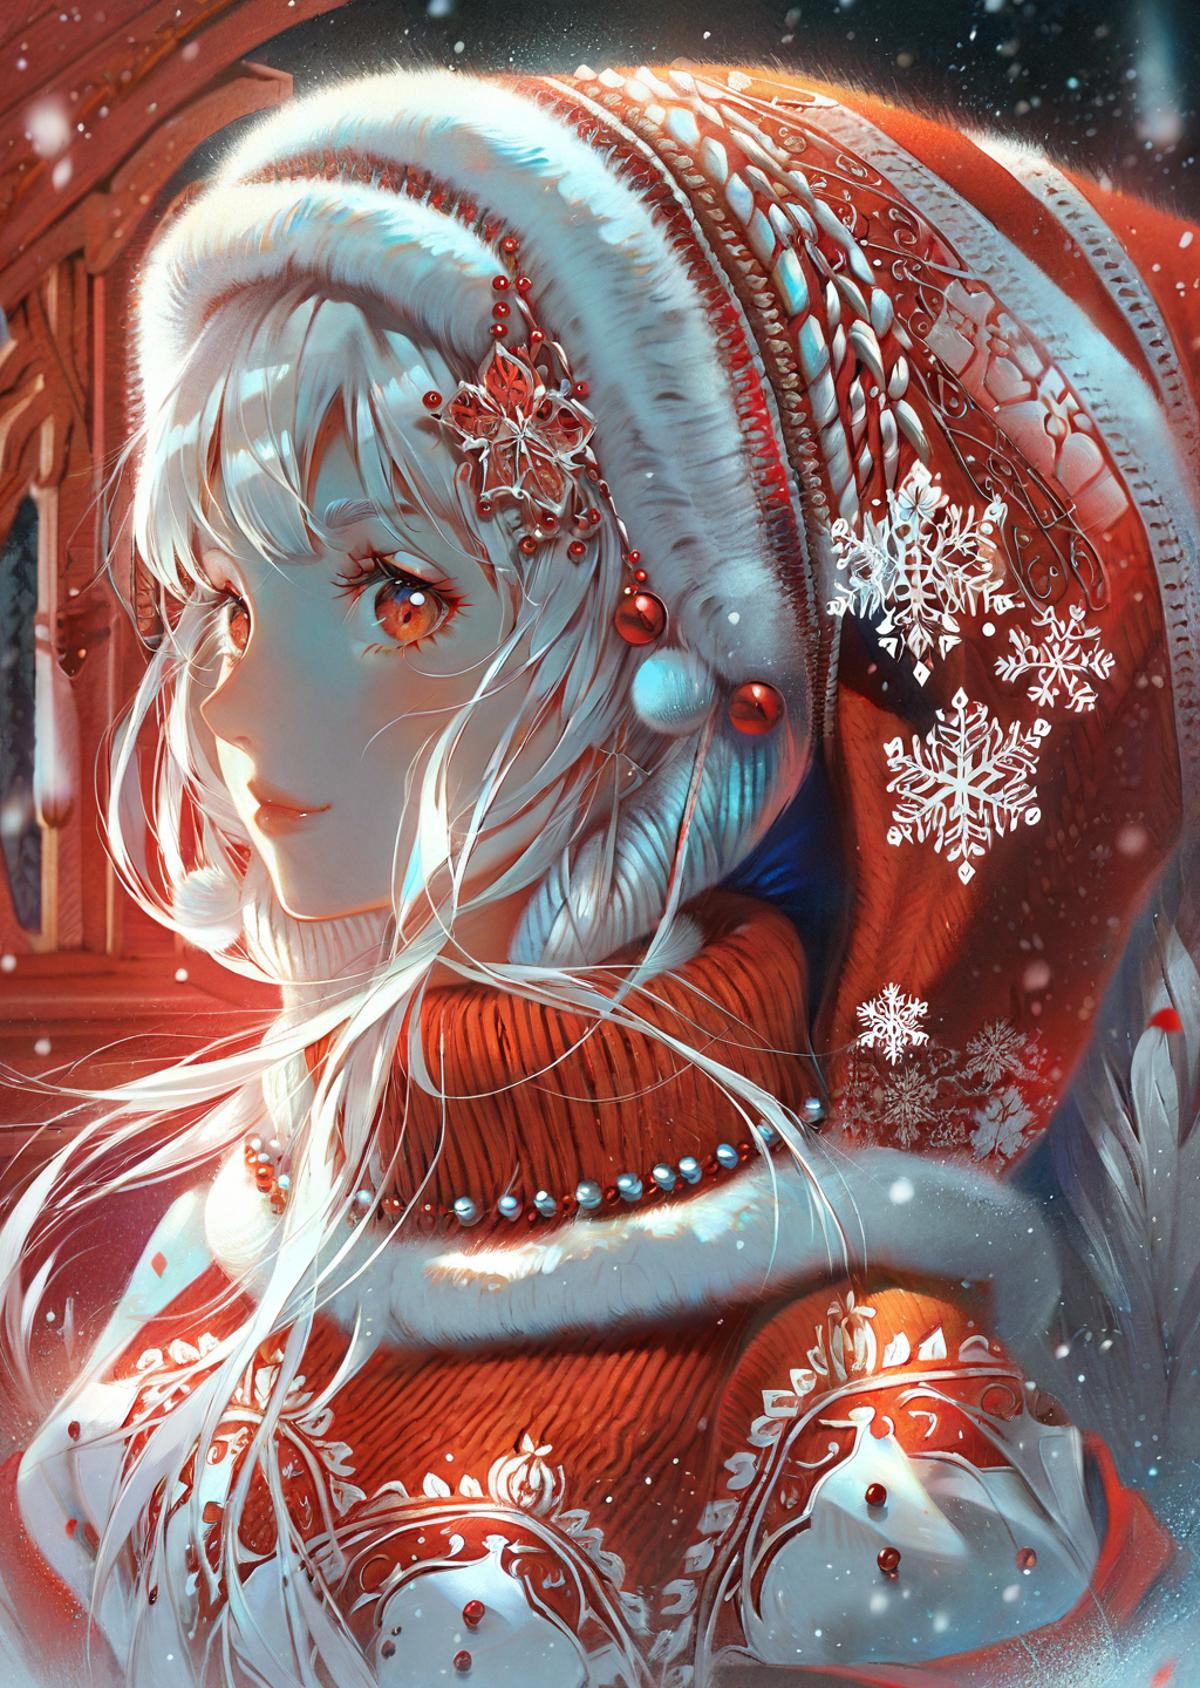 A beautifully illustrated image of a girl in a Santa hat.